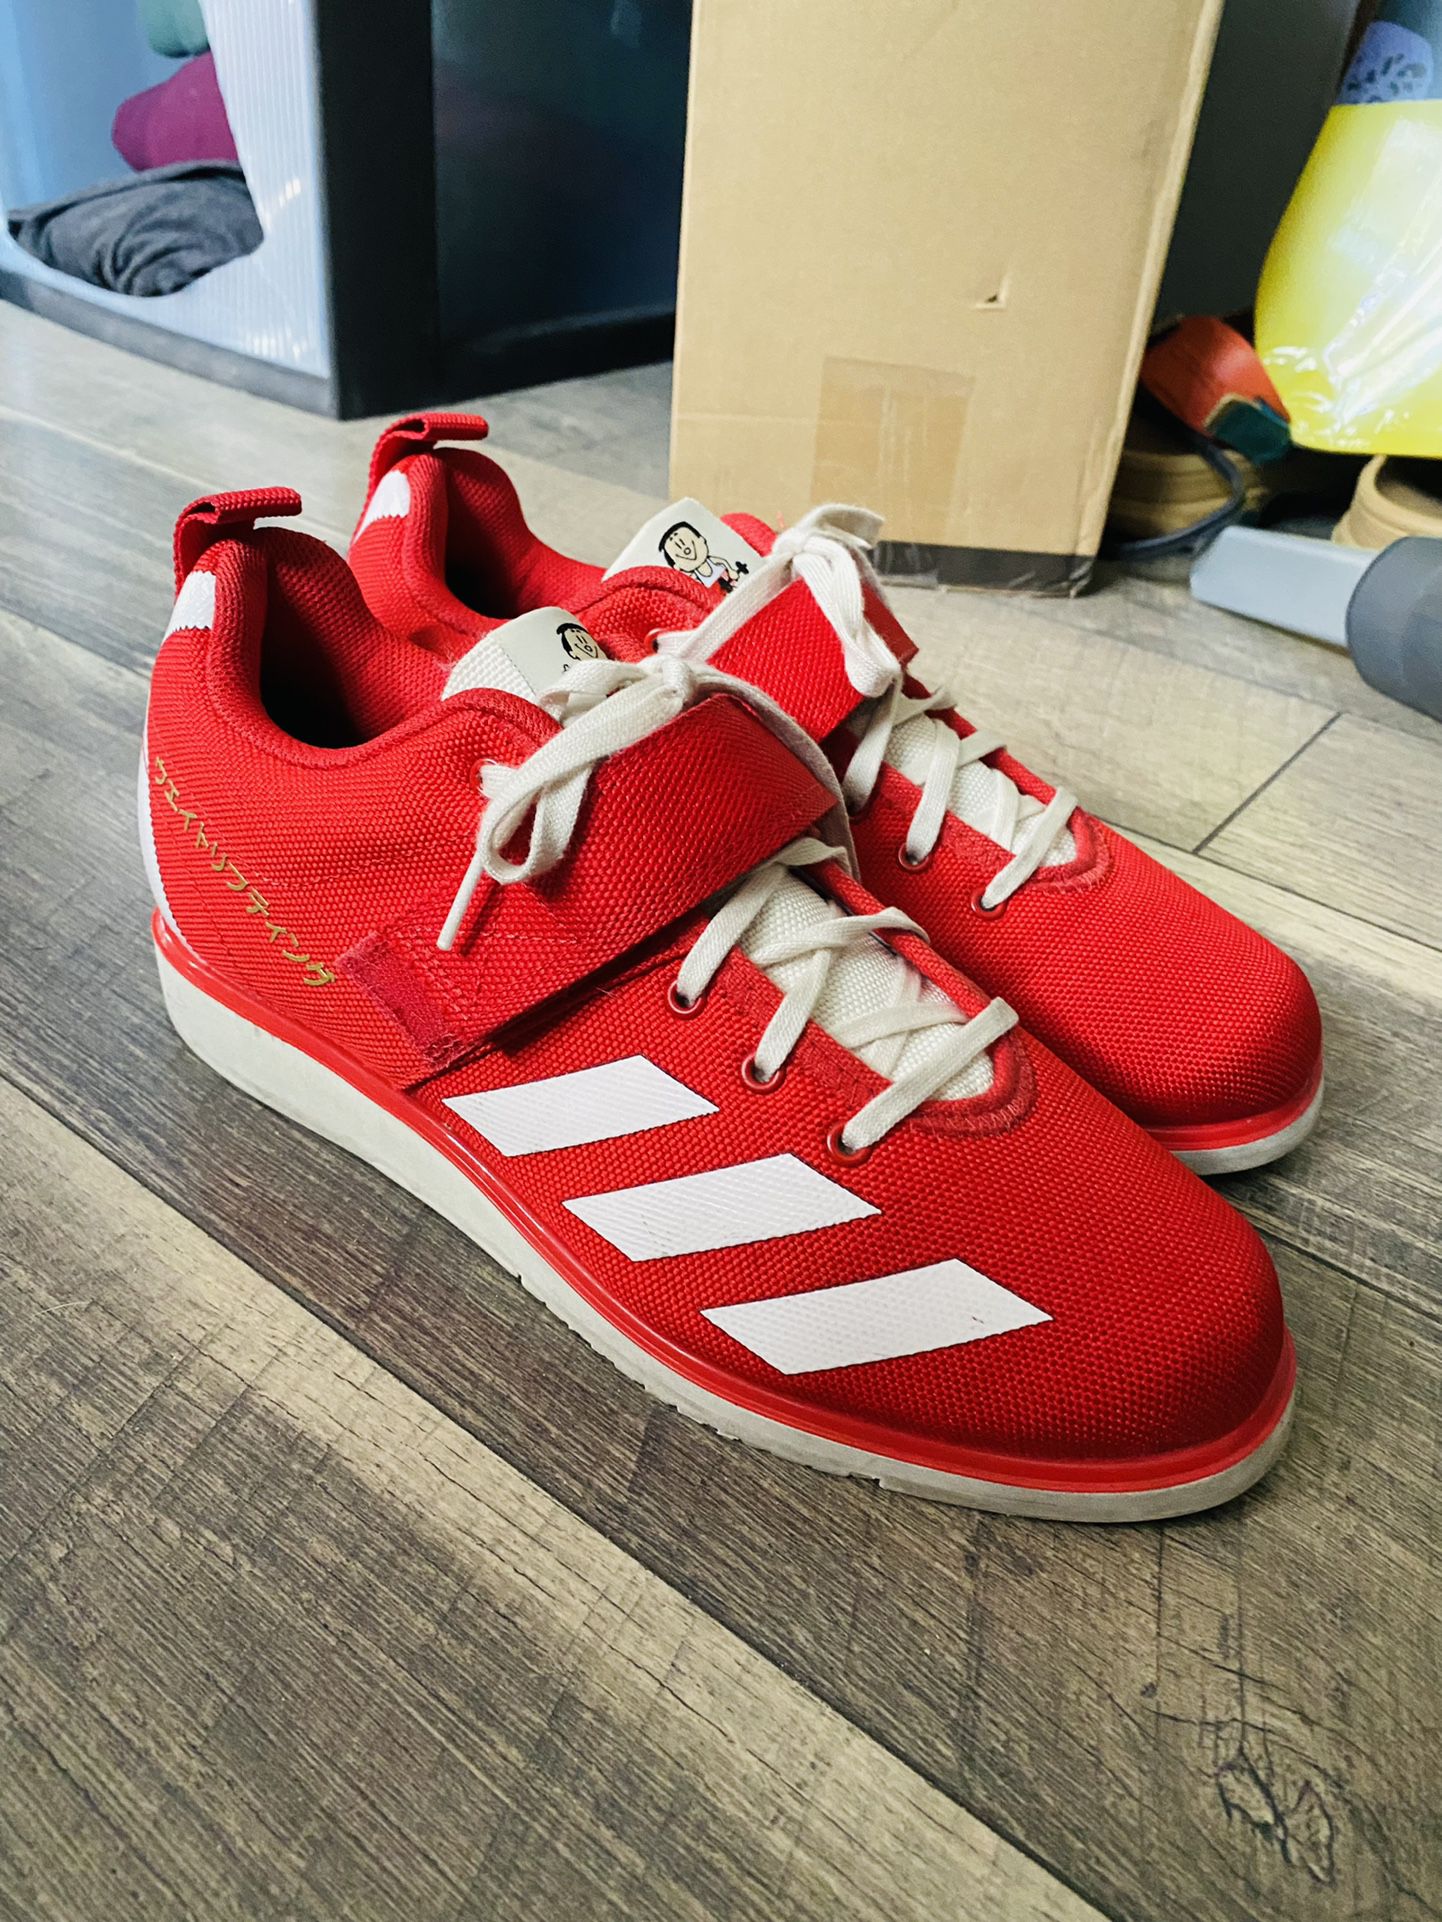 4 Adidas Powerlifting shoes Sale in Los Angeles, CA OfferUp